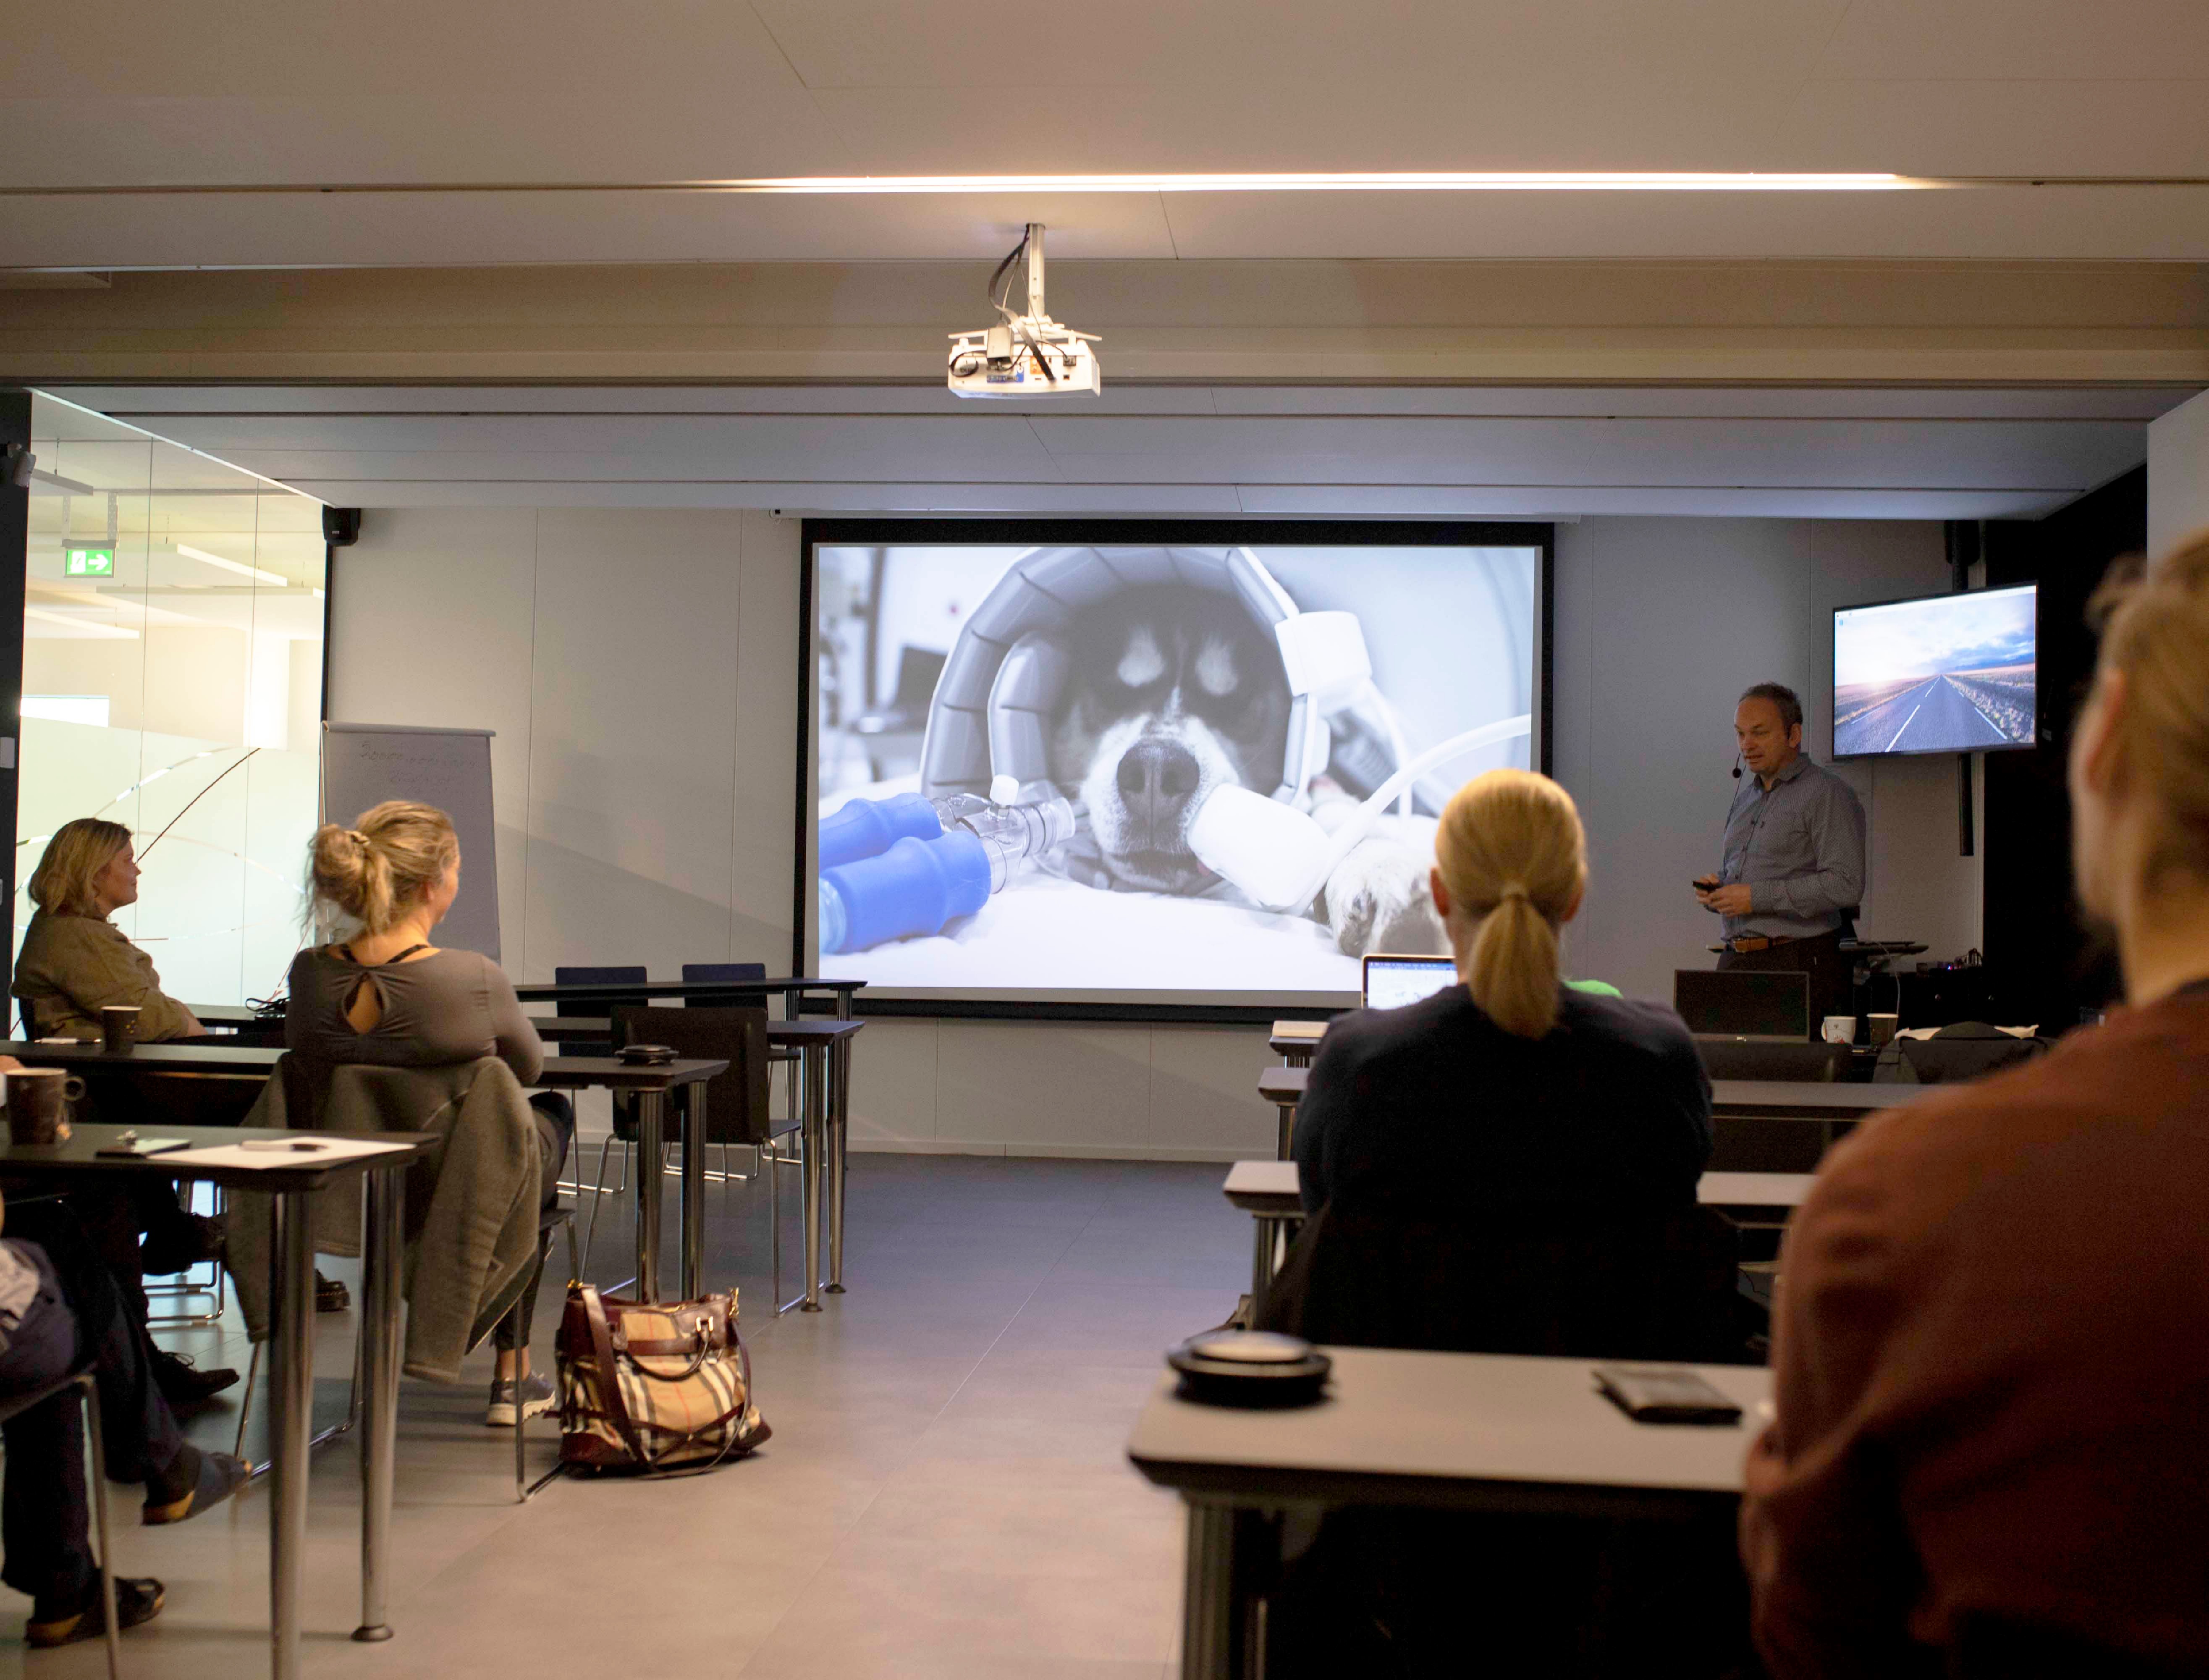 Veterinary meeting organized by Fredrikstad Animal Hospital with Morten Bruvold, MR Product Specialist from GE Healthcare presenting to the veterinarians.